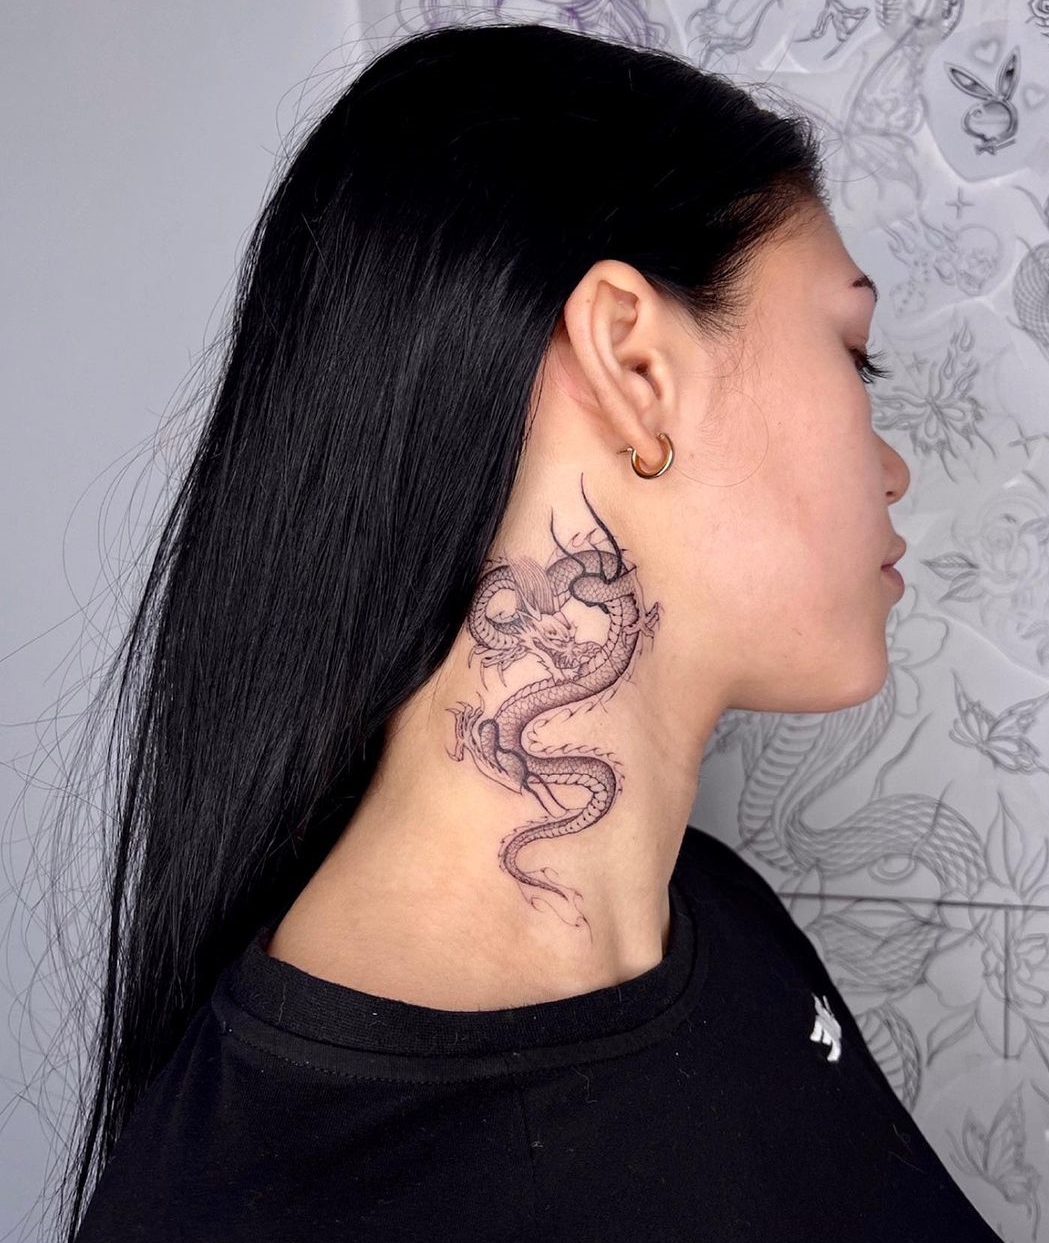 Dragon Neck Tattoos  Photos of Works By Pro Tattoo Artists at theYoucom